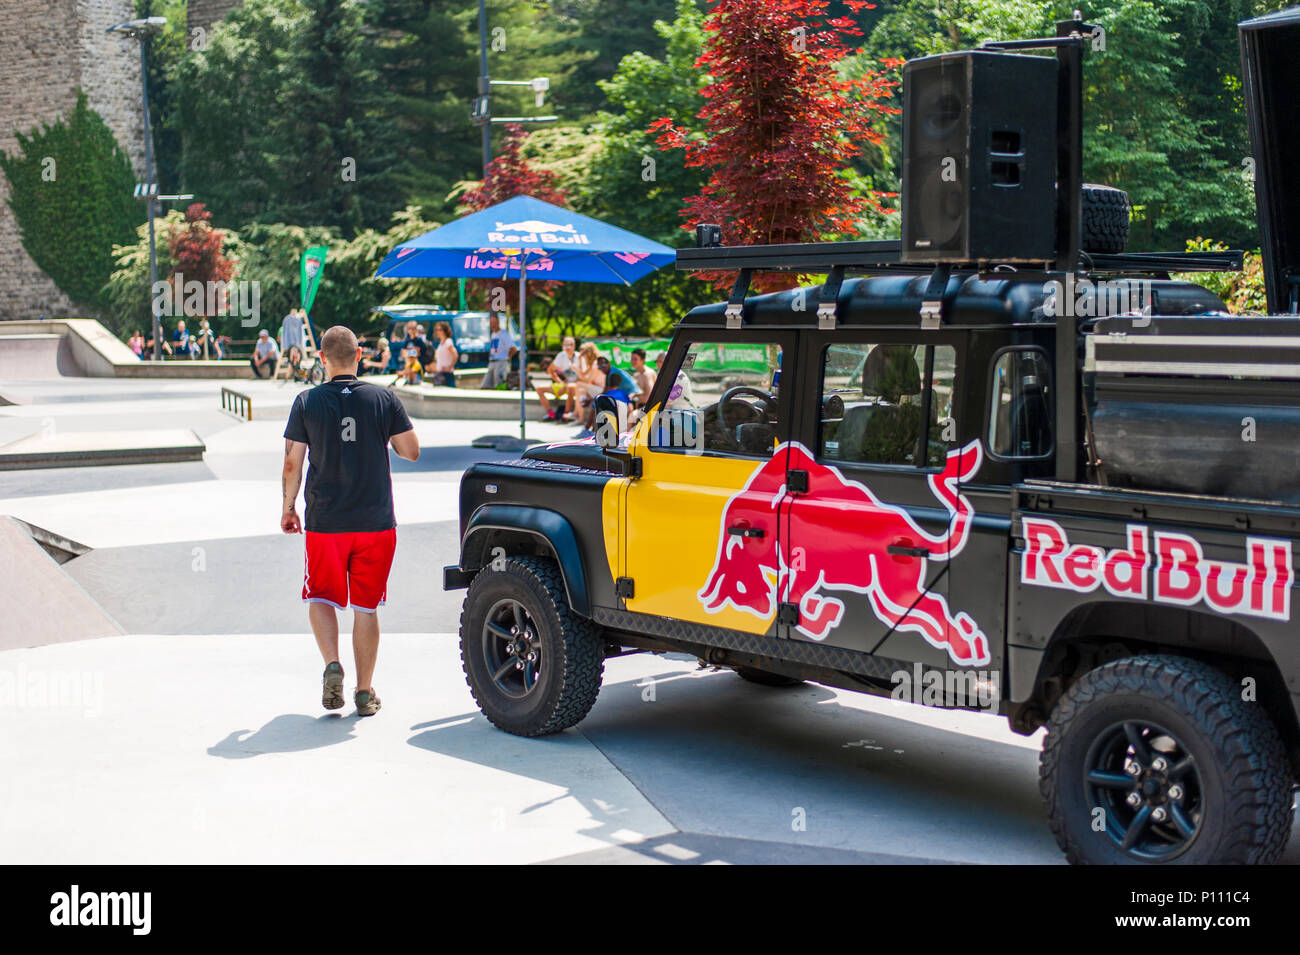 Redbull truck during the acrobatics event, Luxembourg Stock Photo - Alamy